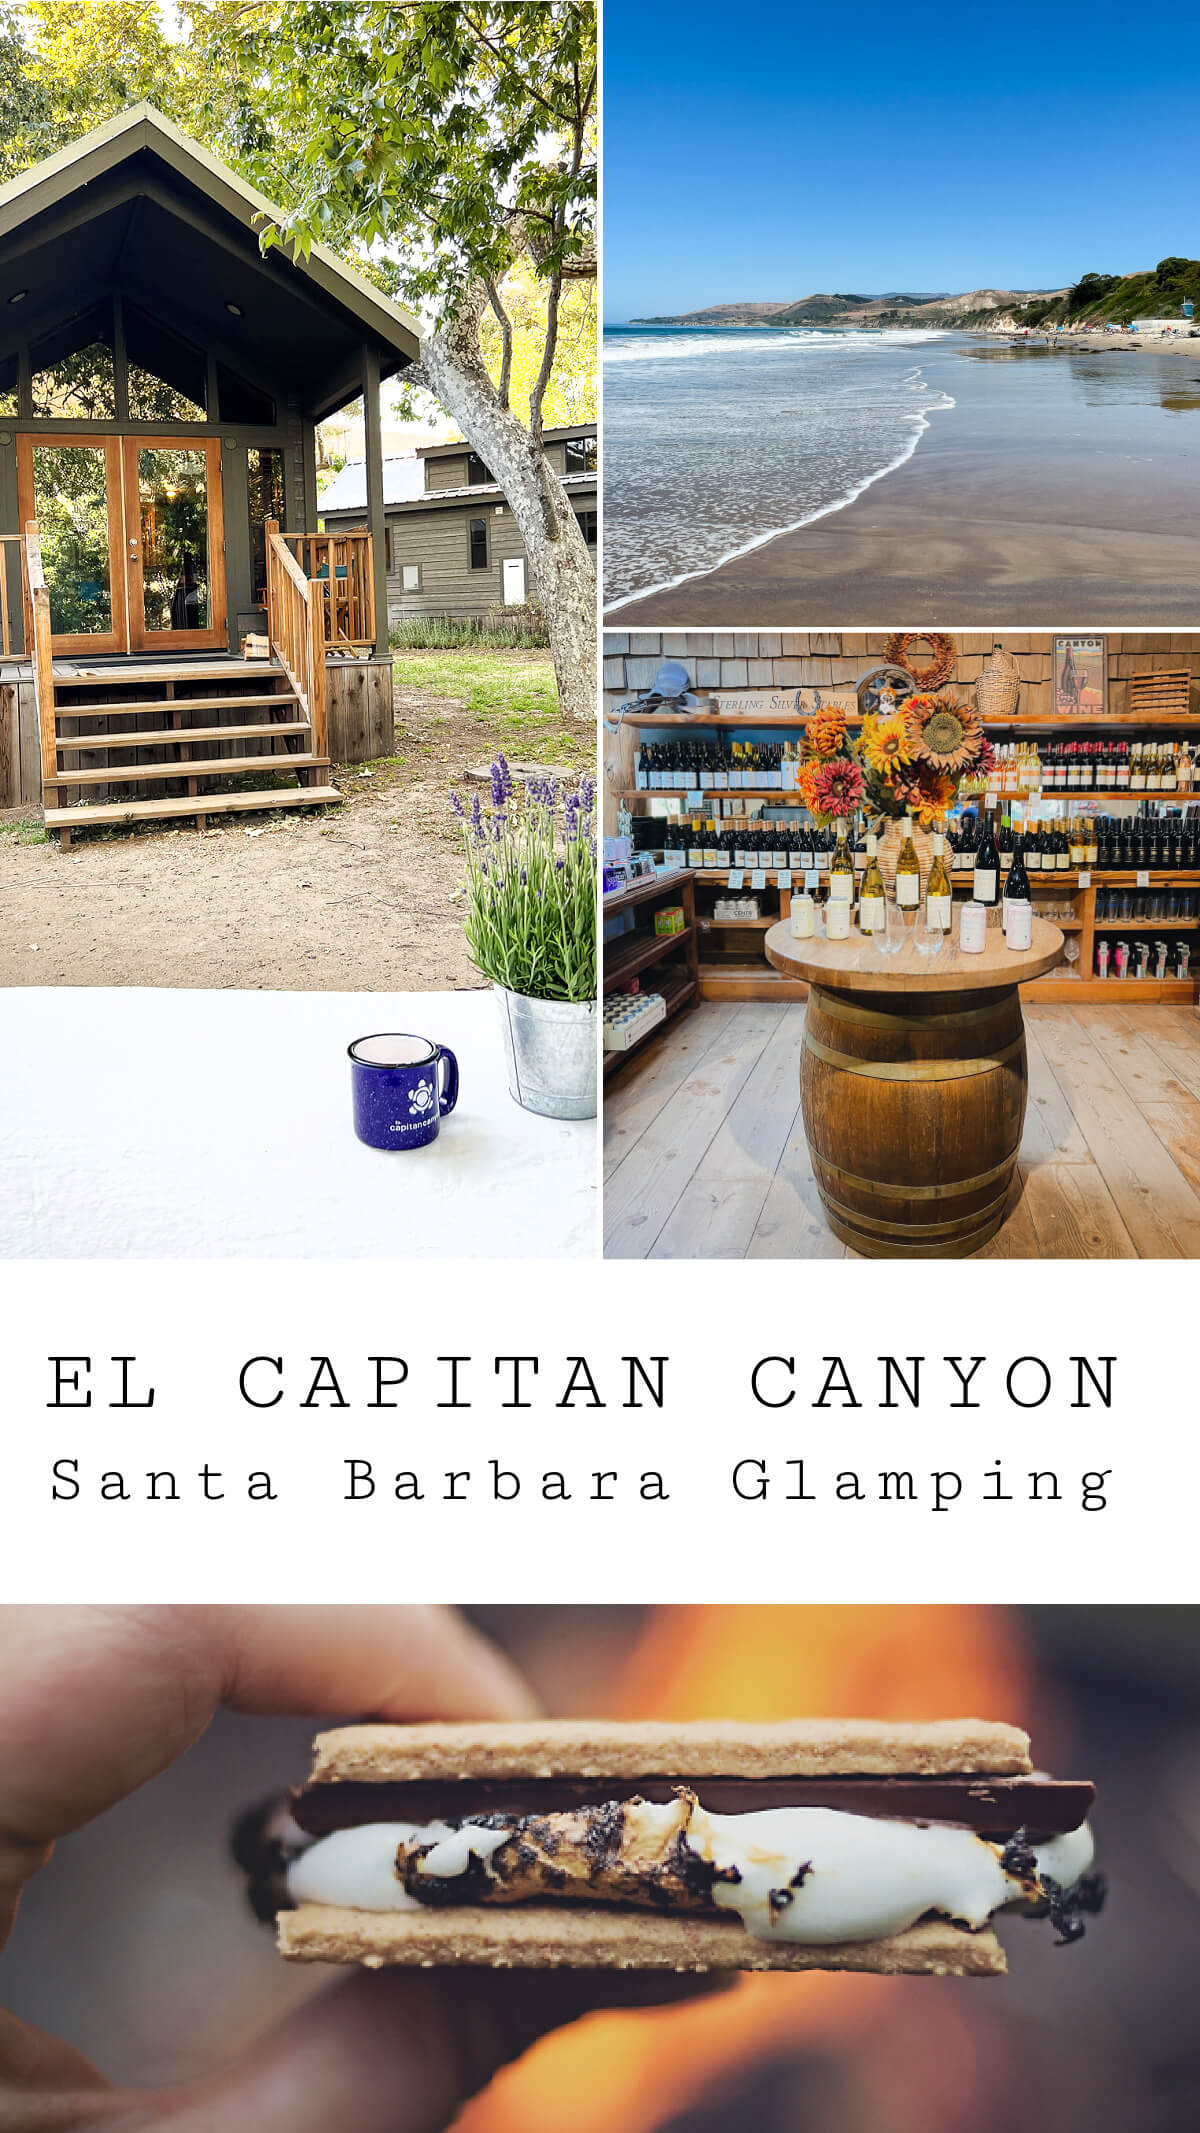 A collage of images from the El Capitan Canyon: A cedar cabin, the beach, wine in the Canyon Market, and a s'more. Text overlay reads "El Capitan Canyon Santa Barbara Glamping"